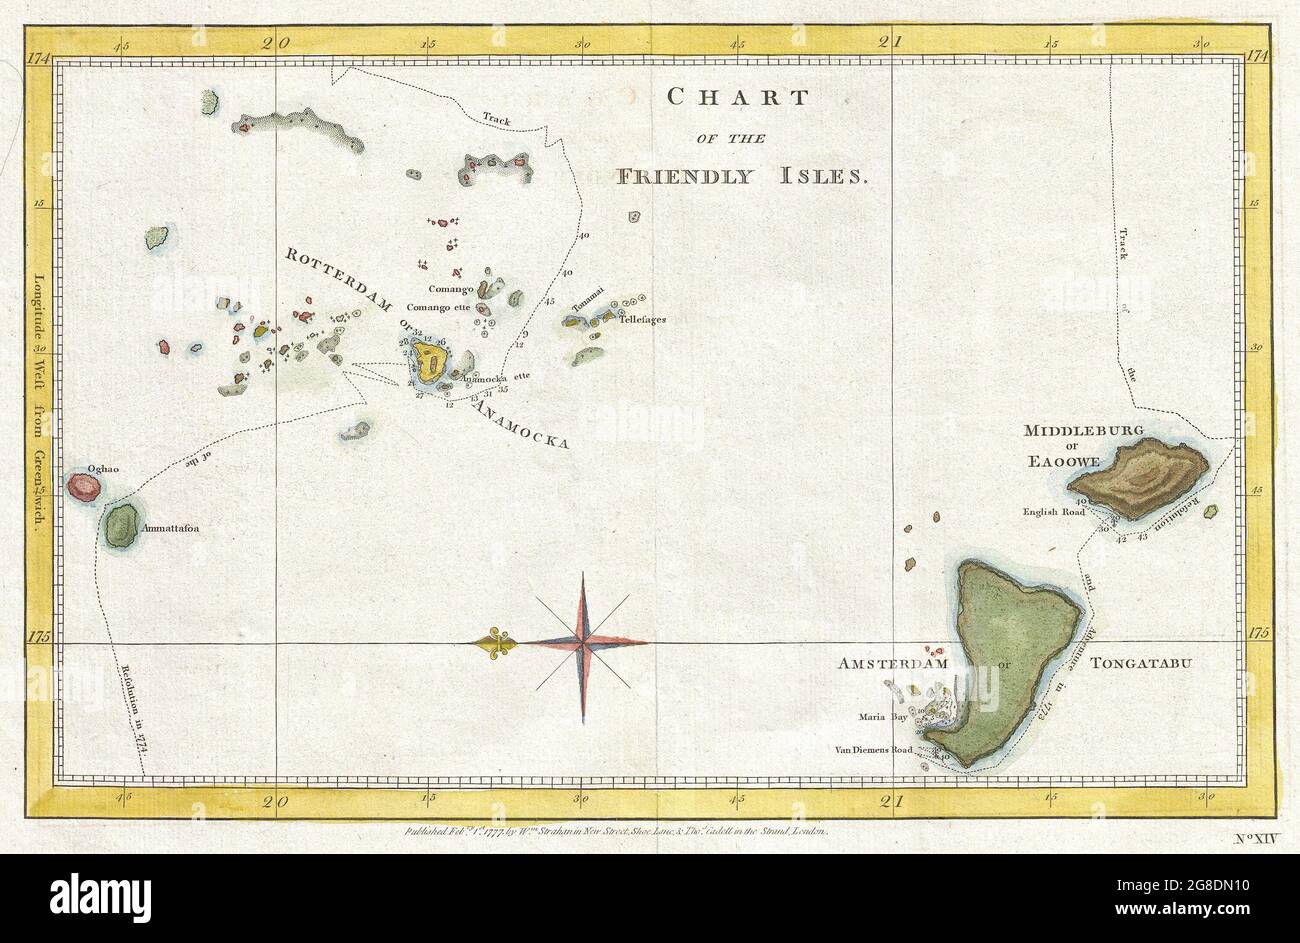 Chart of the Friendly Islands, or Tonga, from 1777. Oriented to the East,  this map depicts the Tongatapu Island Group and the Ha'Apai Group that make  up the Kingdom of Tonga. Shows